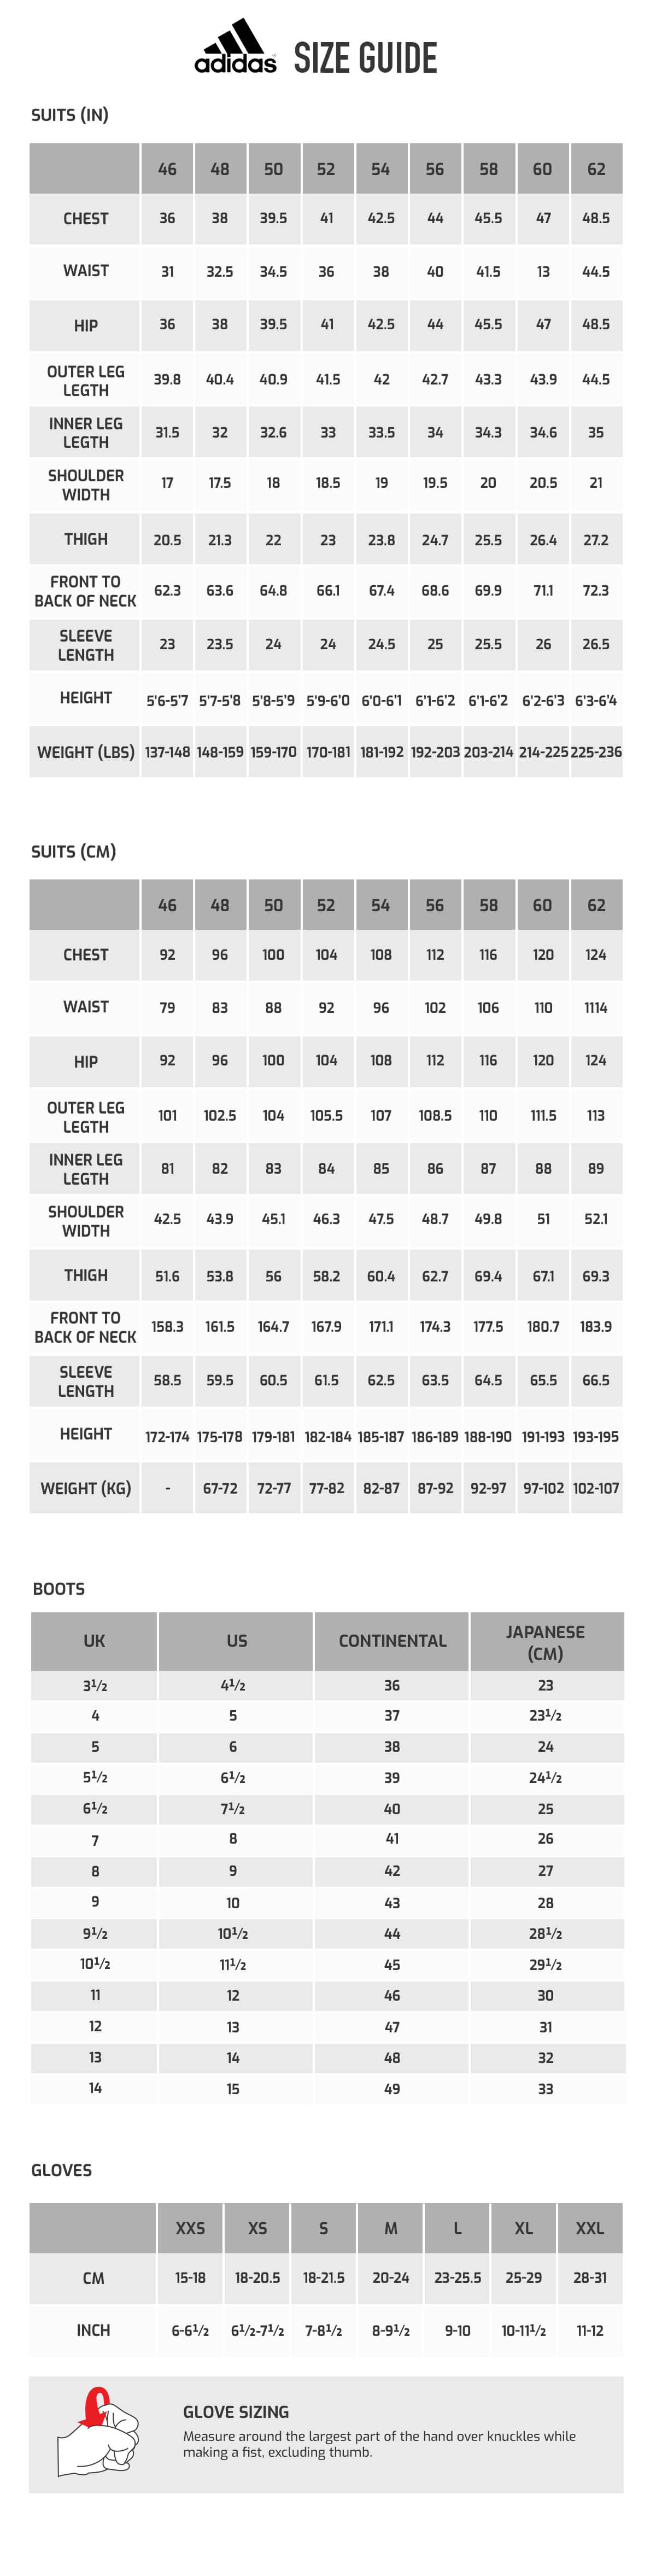 adidas performance size guide